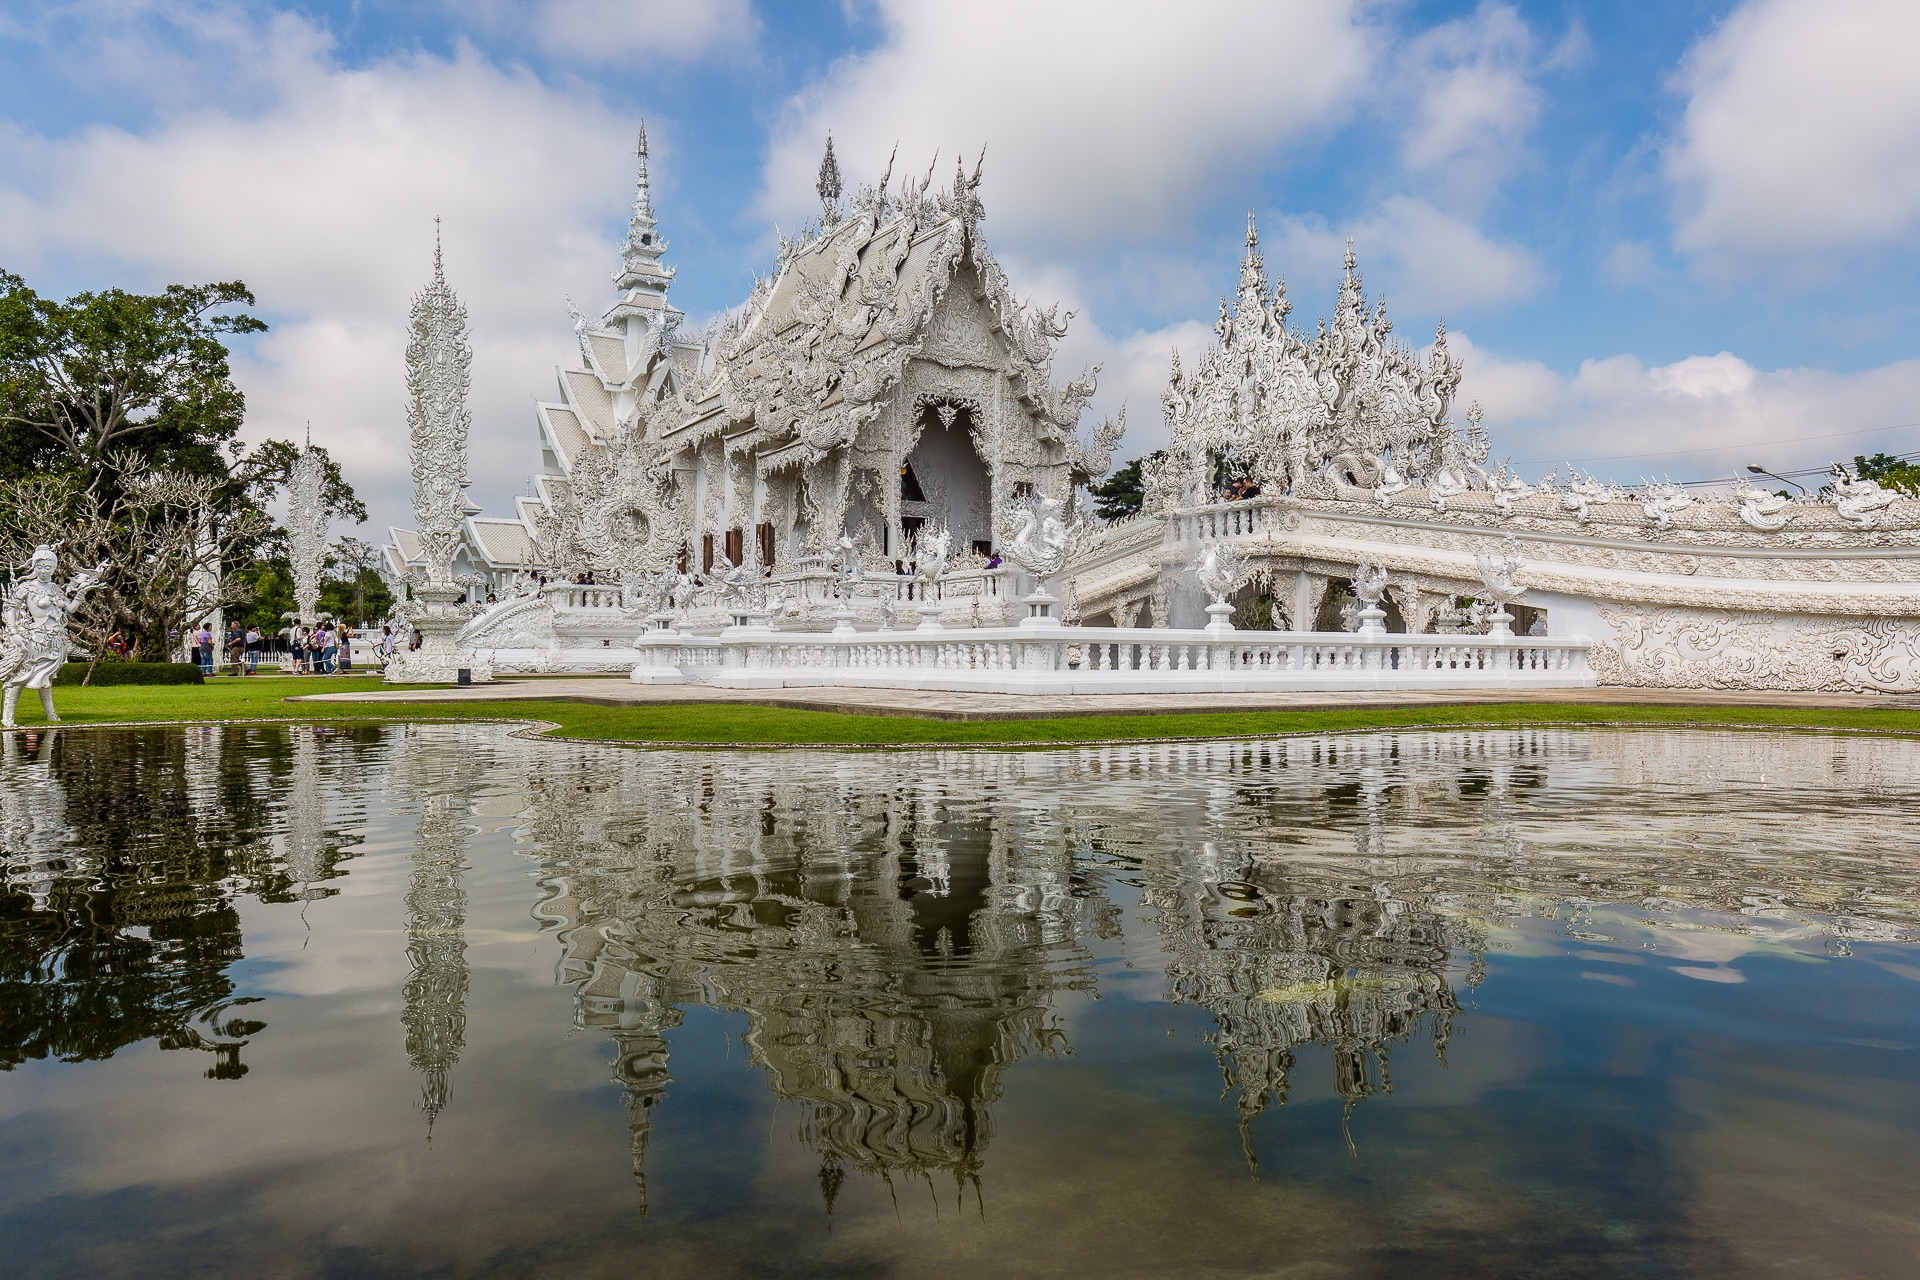 The White Temple...